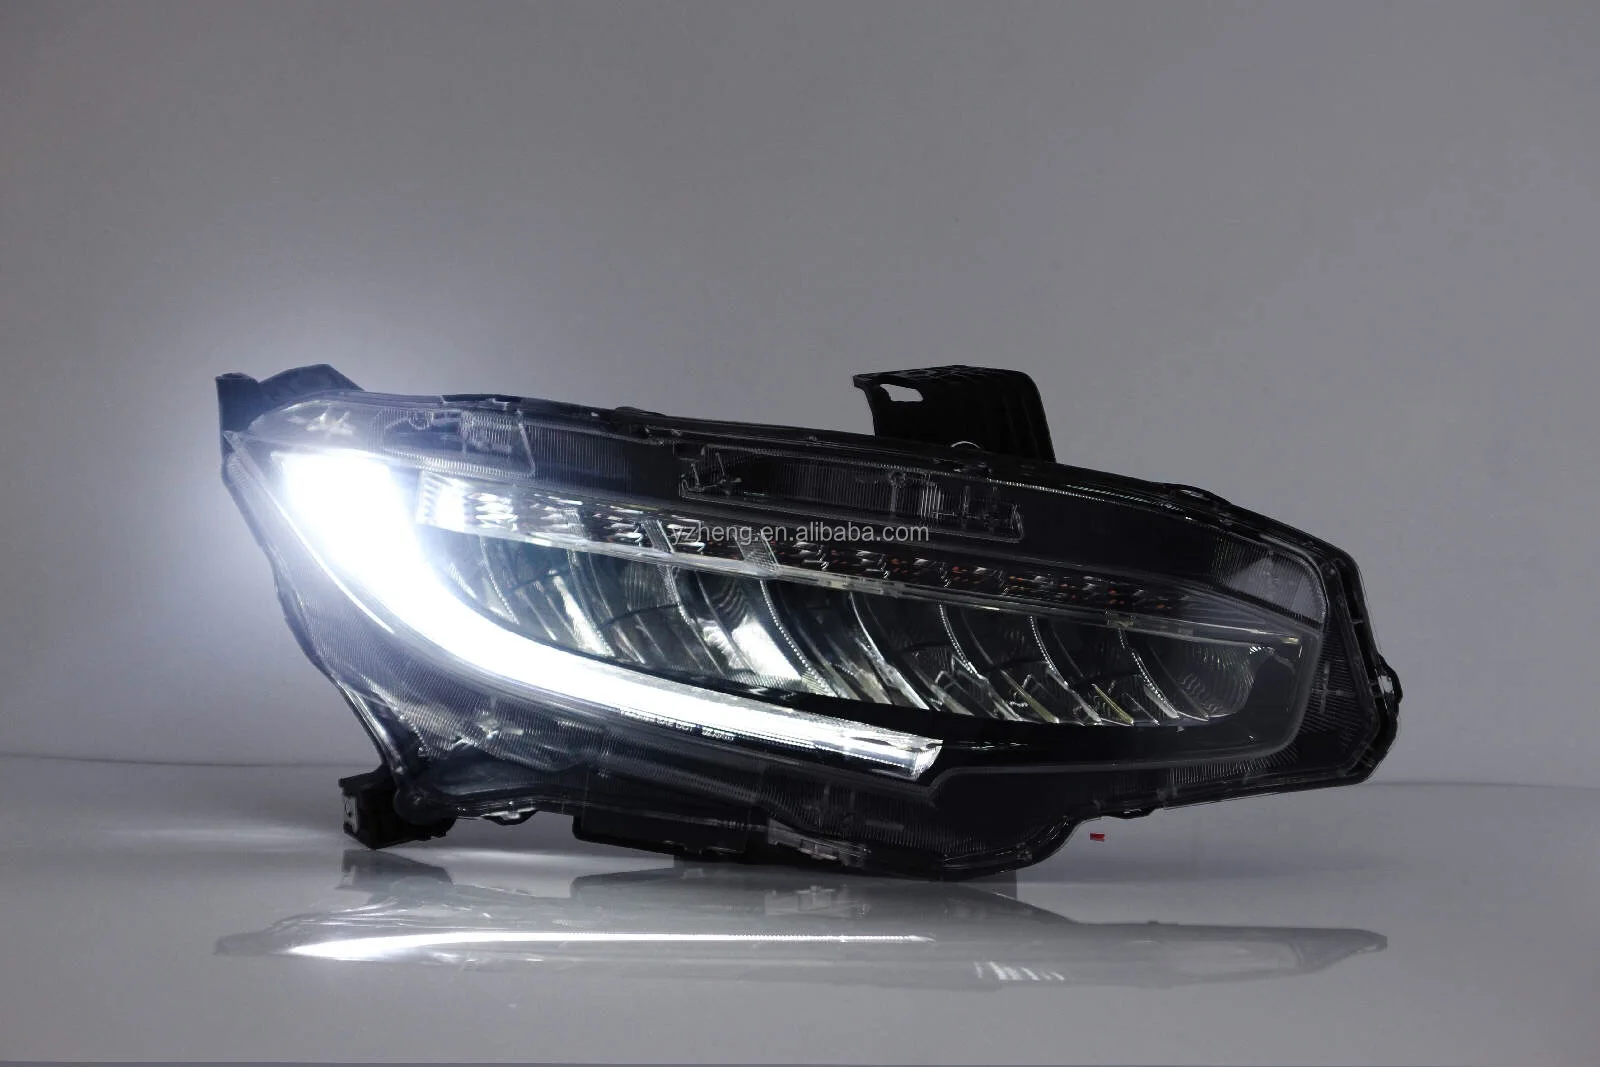 VLAND Factory Car Headlights For Civic 2016-2017 Full-LED Head Lights For Civic FC Plug And Play